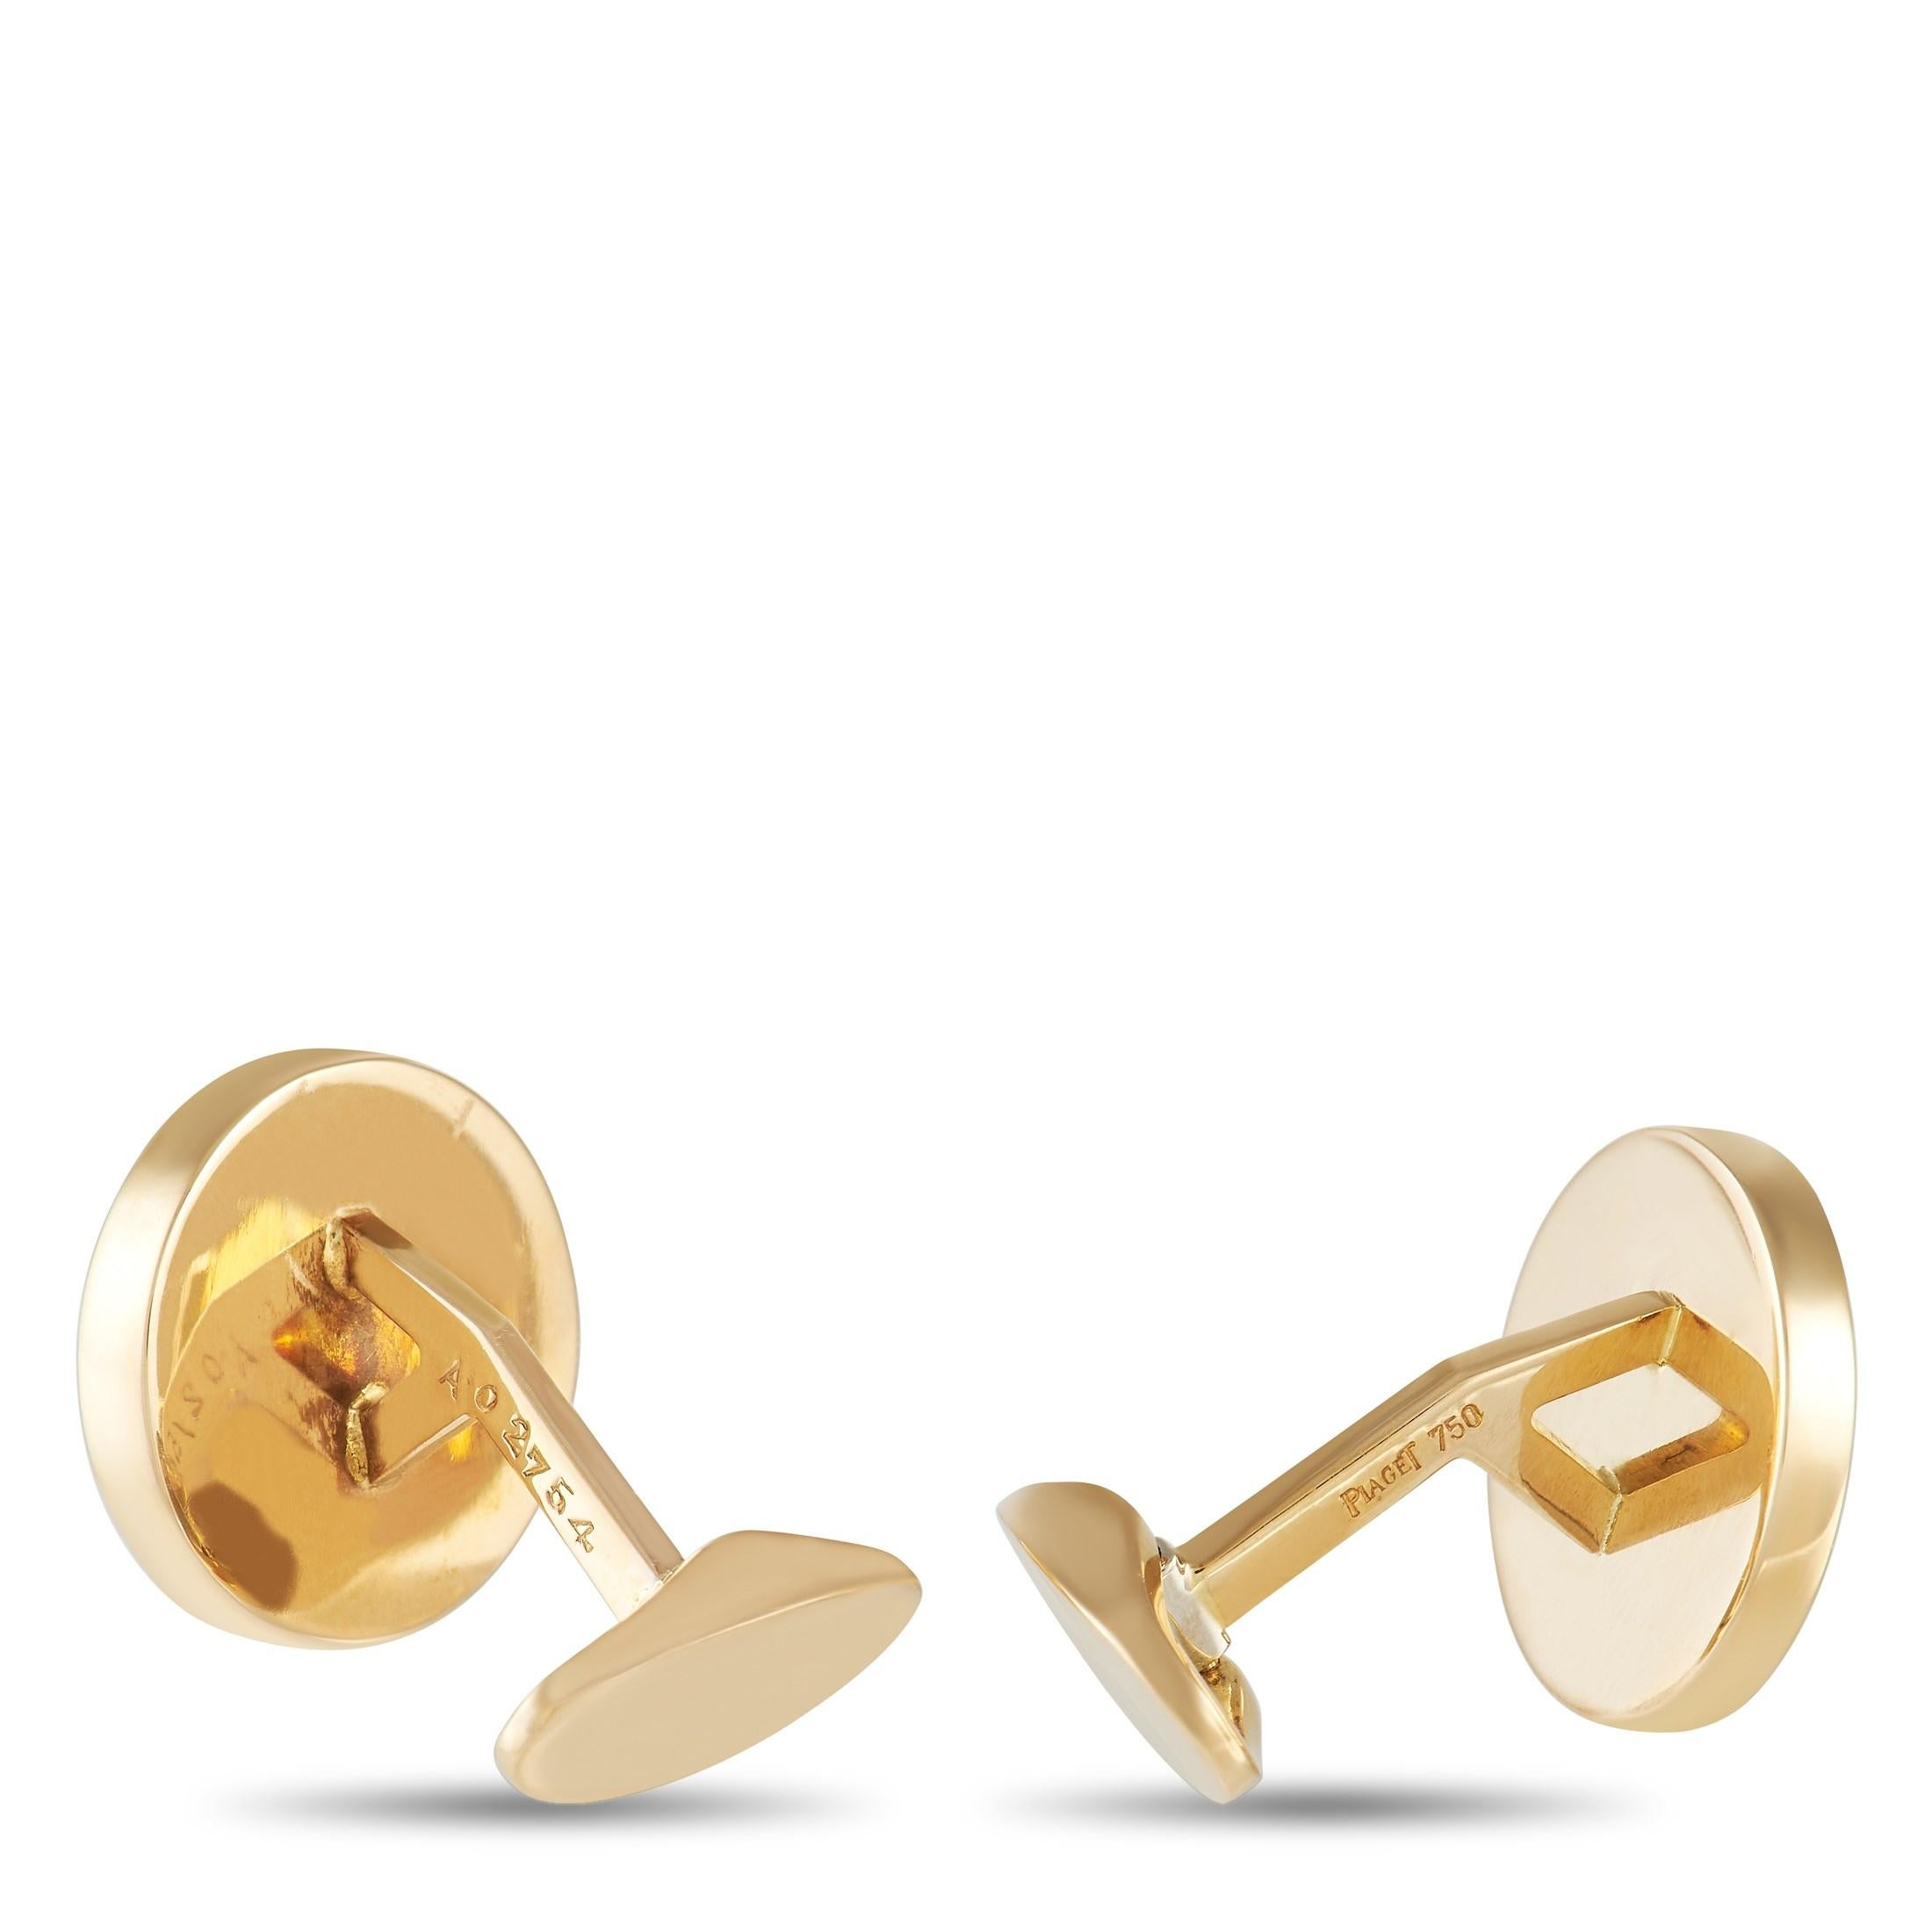 Add an edgy touch to your formal or business look with this pair of onyx cufflinks from Swiss luxury jeweler Piaget. The cup member, post, and clasp are fashioned in 18K yellow gold. The front face is a black onyx that exudes masculine elegance.